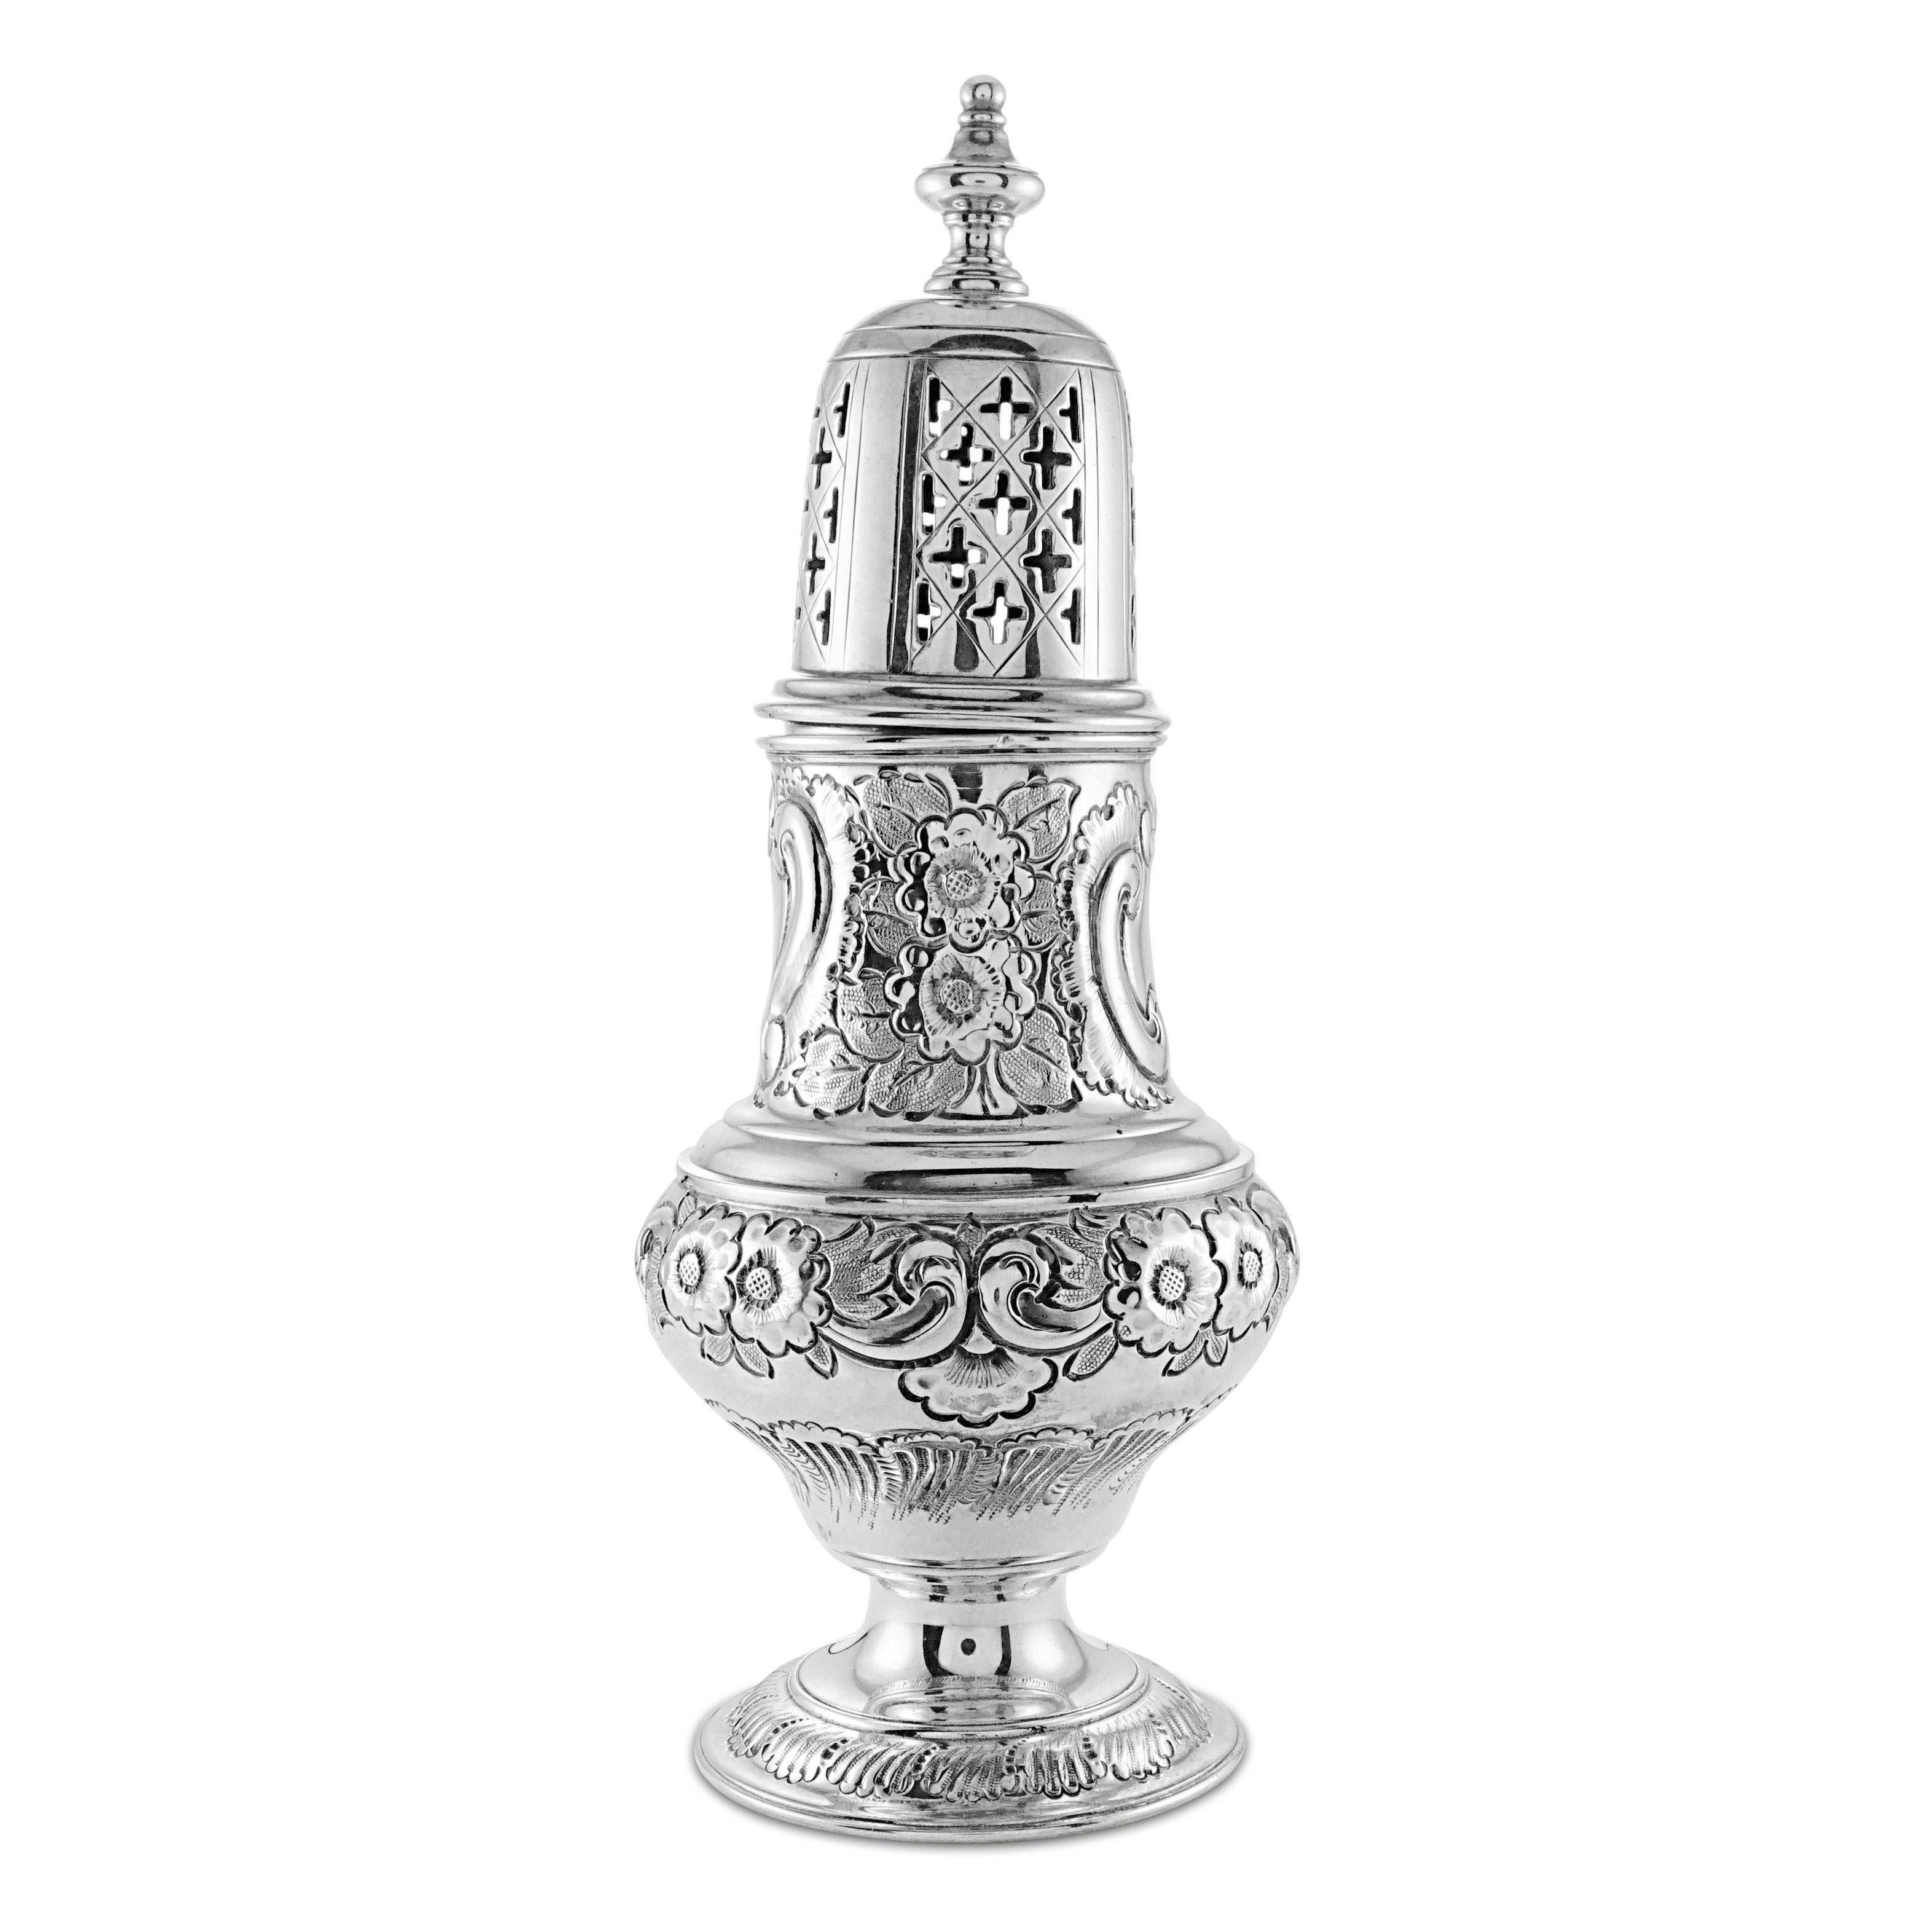 Fine and Impressive, Large Antique Edwardian Sterling Silver Sugar Caster. Beautifully Hand Embossed Floral and Scroll and Garland Designs. Domed Cover with ornamental piercing and Vasiform finial. Approx. 7” High. Weighing approx. 
 